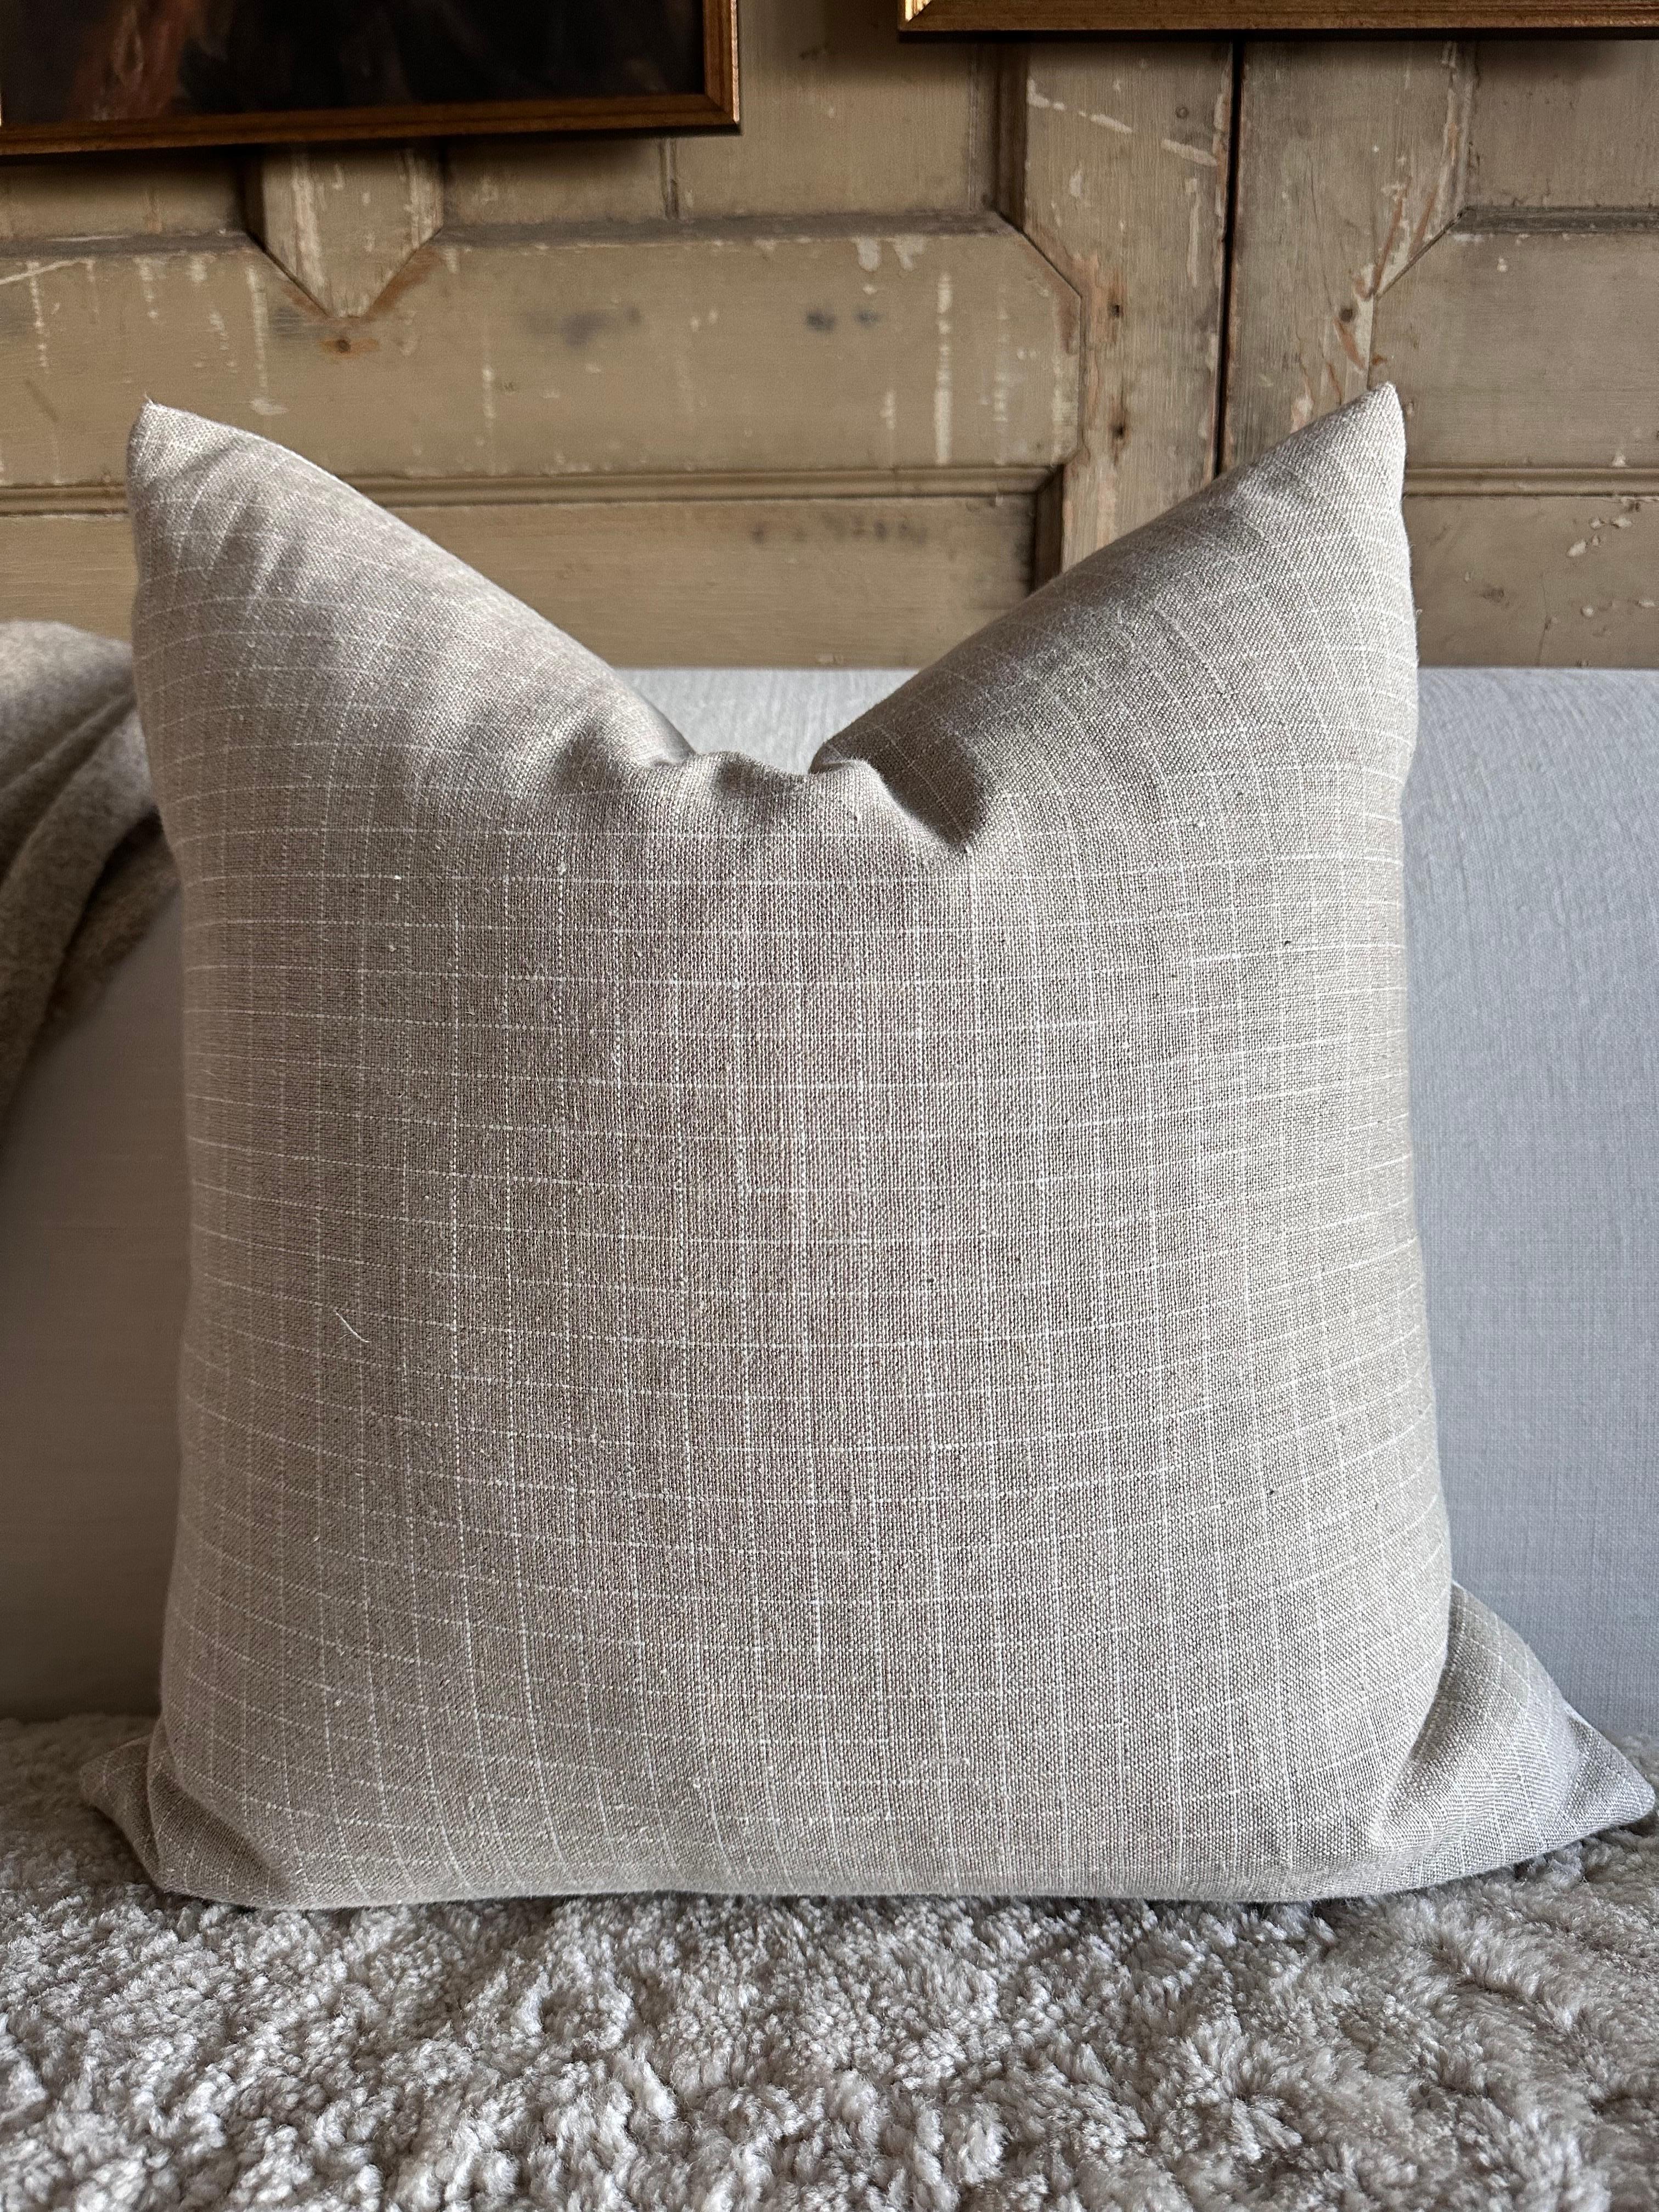 A luxurious heavy woven linen plaid face with stone washed linen back.
Linen fabric is imported from France.
Custom made to order, can be customized to your size.
Color: Blanc / Oyster / Natural
Antique brass zipper
Size 20x20
Includes Down Feather